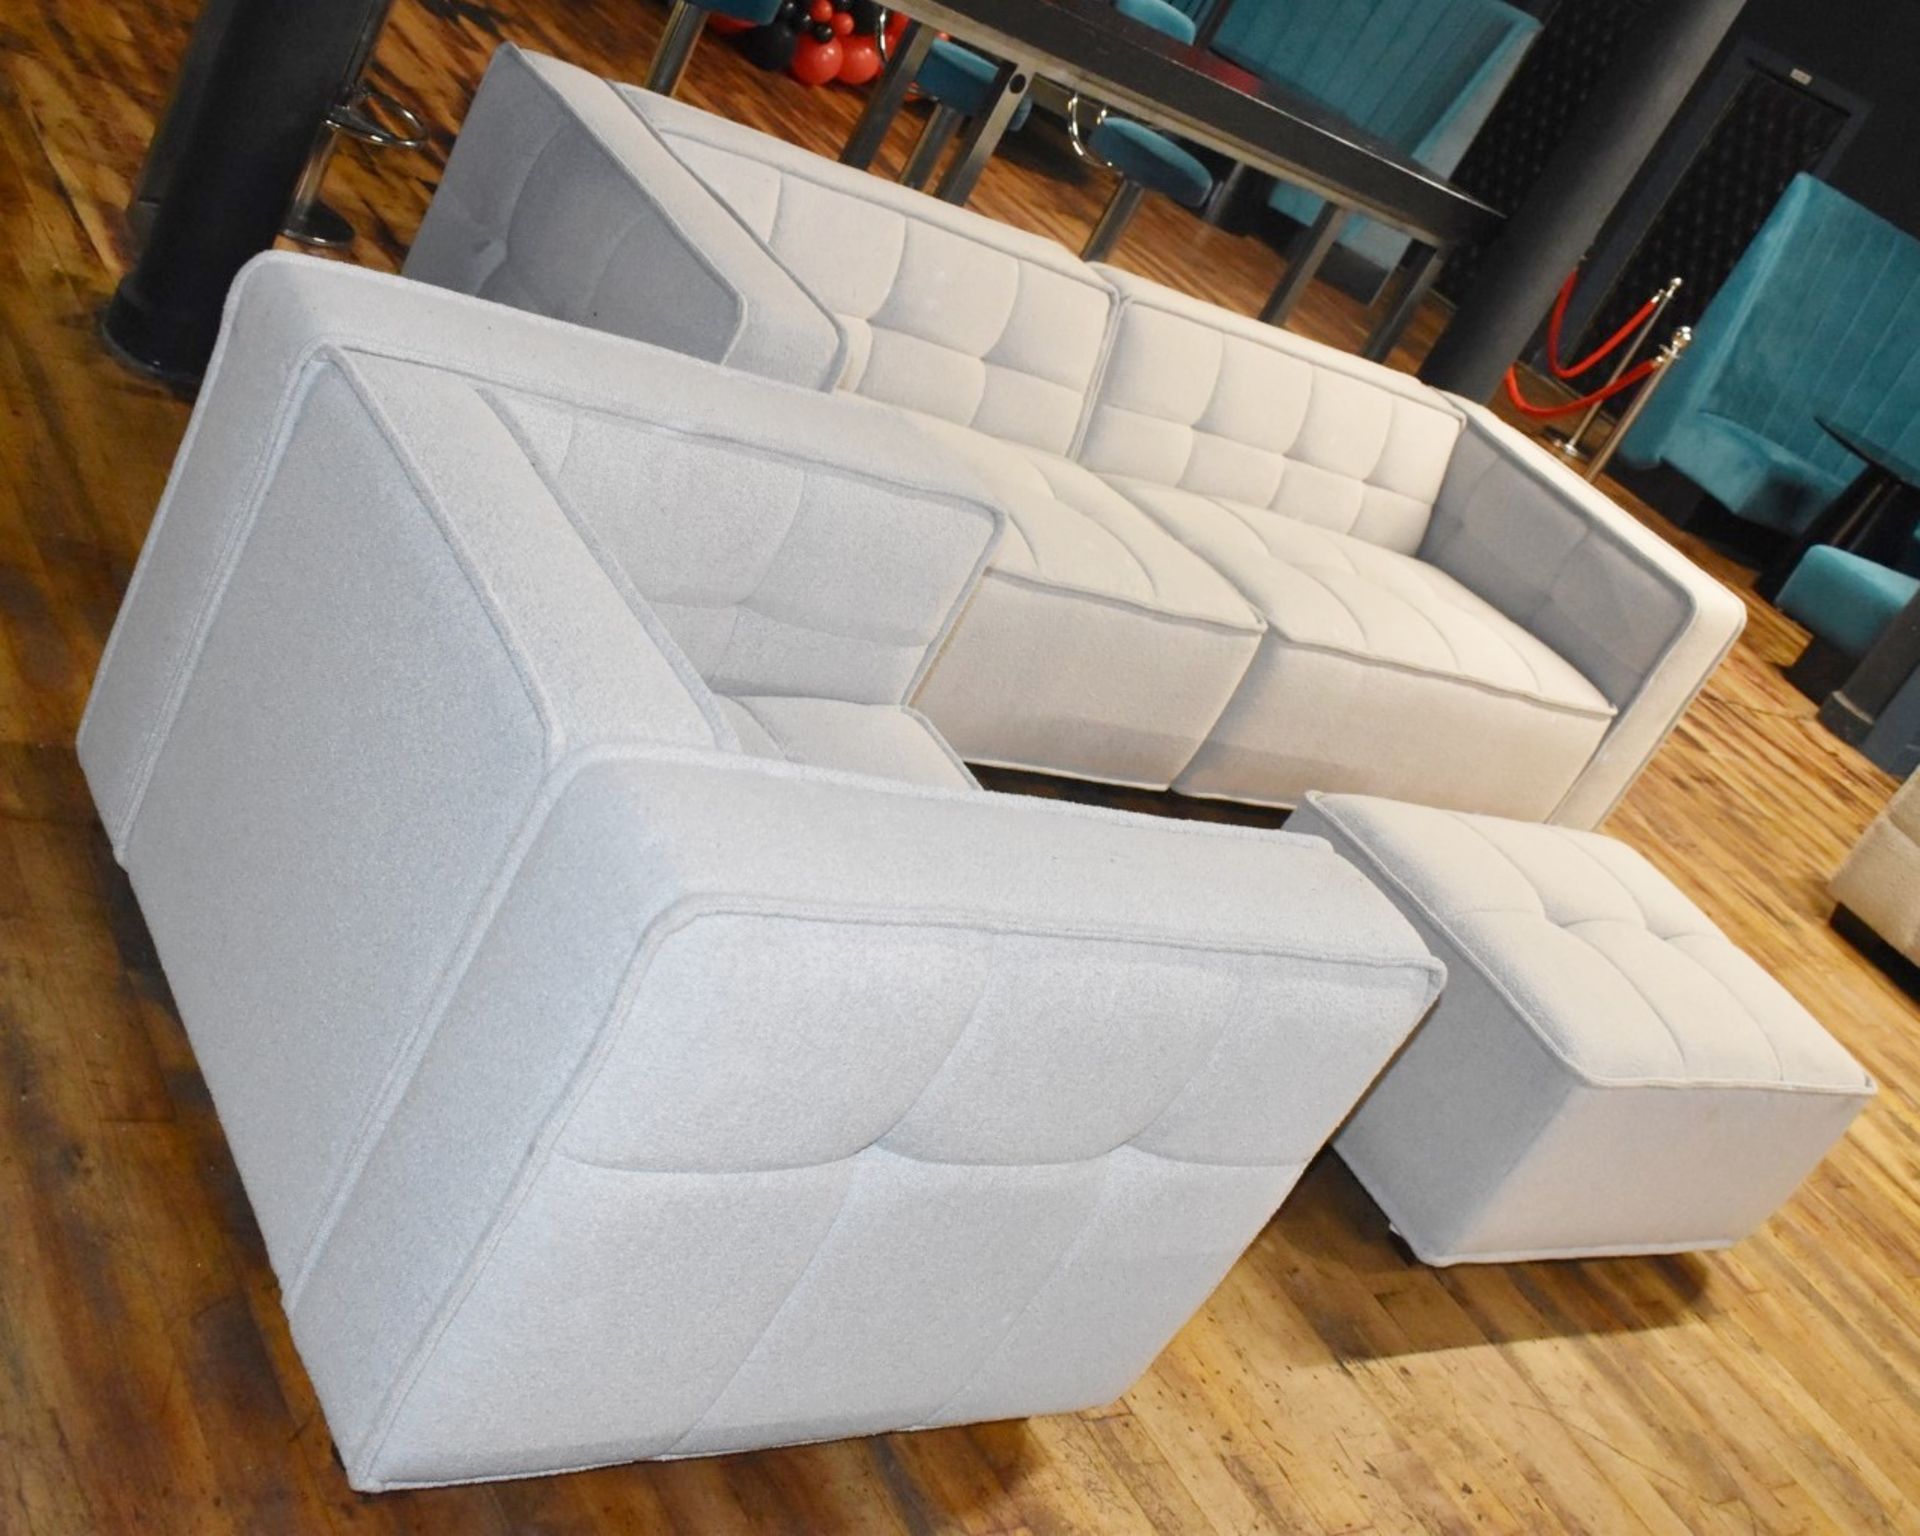 3-Piece Sofa Set, Upholstered with a Premium Upholstery in a Neutral Tone - Image 2 of 7